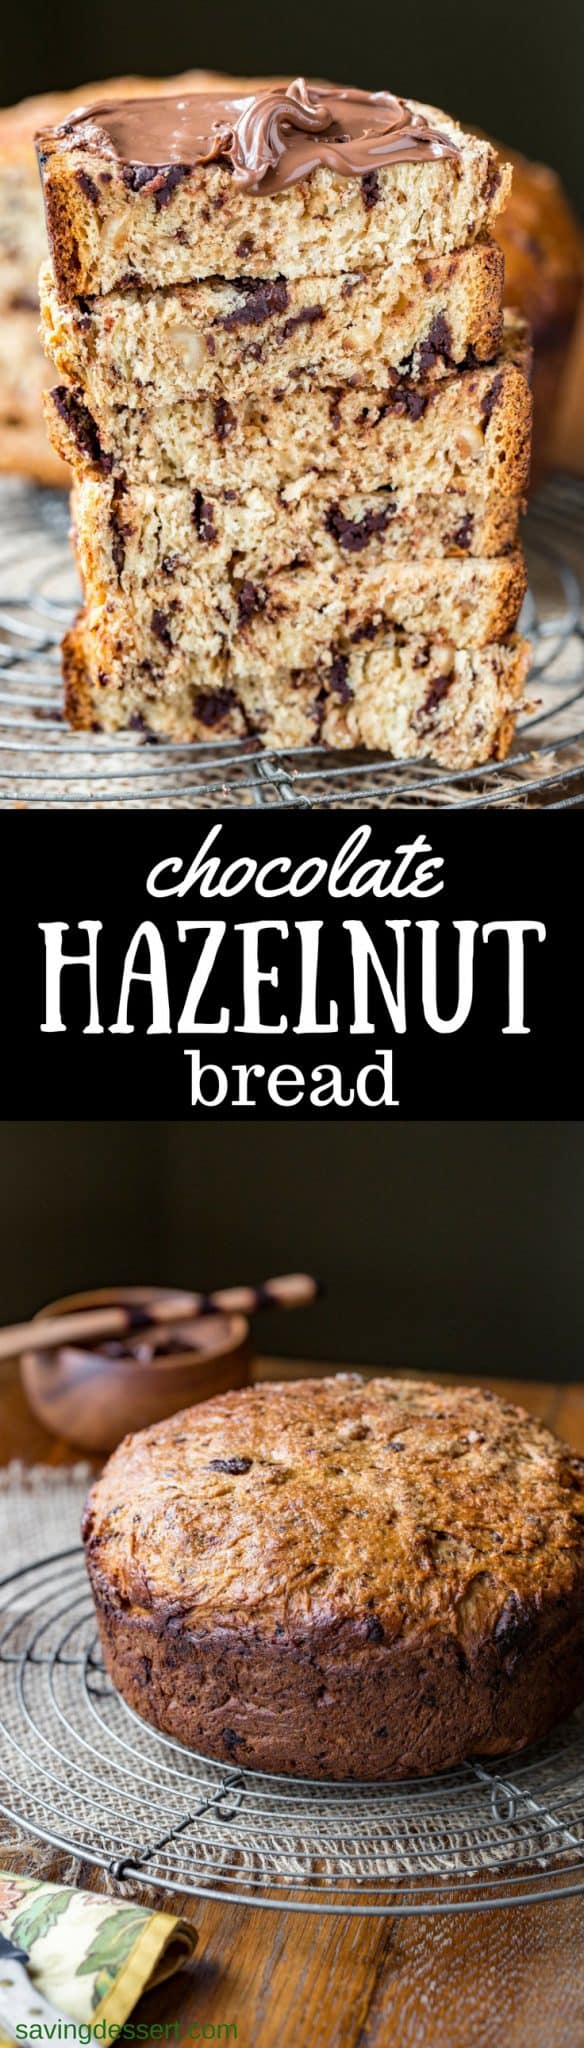 Chocolate Hazelnut Bread ~ a simple yeasted loaf of fluffy sweet bread, loaded with chunks of bittersweet chocolate and toasted hazelnuts. Serve with a slathering of Nutella for a wonderful treat! www.savingdessert.com #sweetbread #bread #chocolate #chocolatehazelnut #hazelnut #chocolatebread #savingroomfordessert